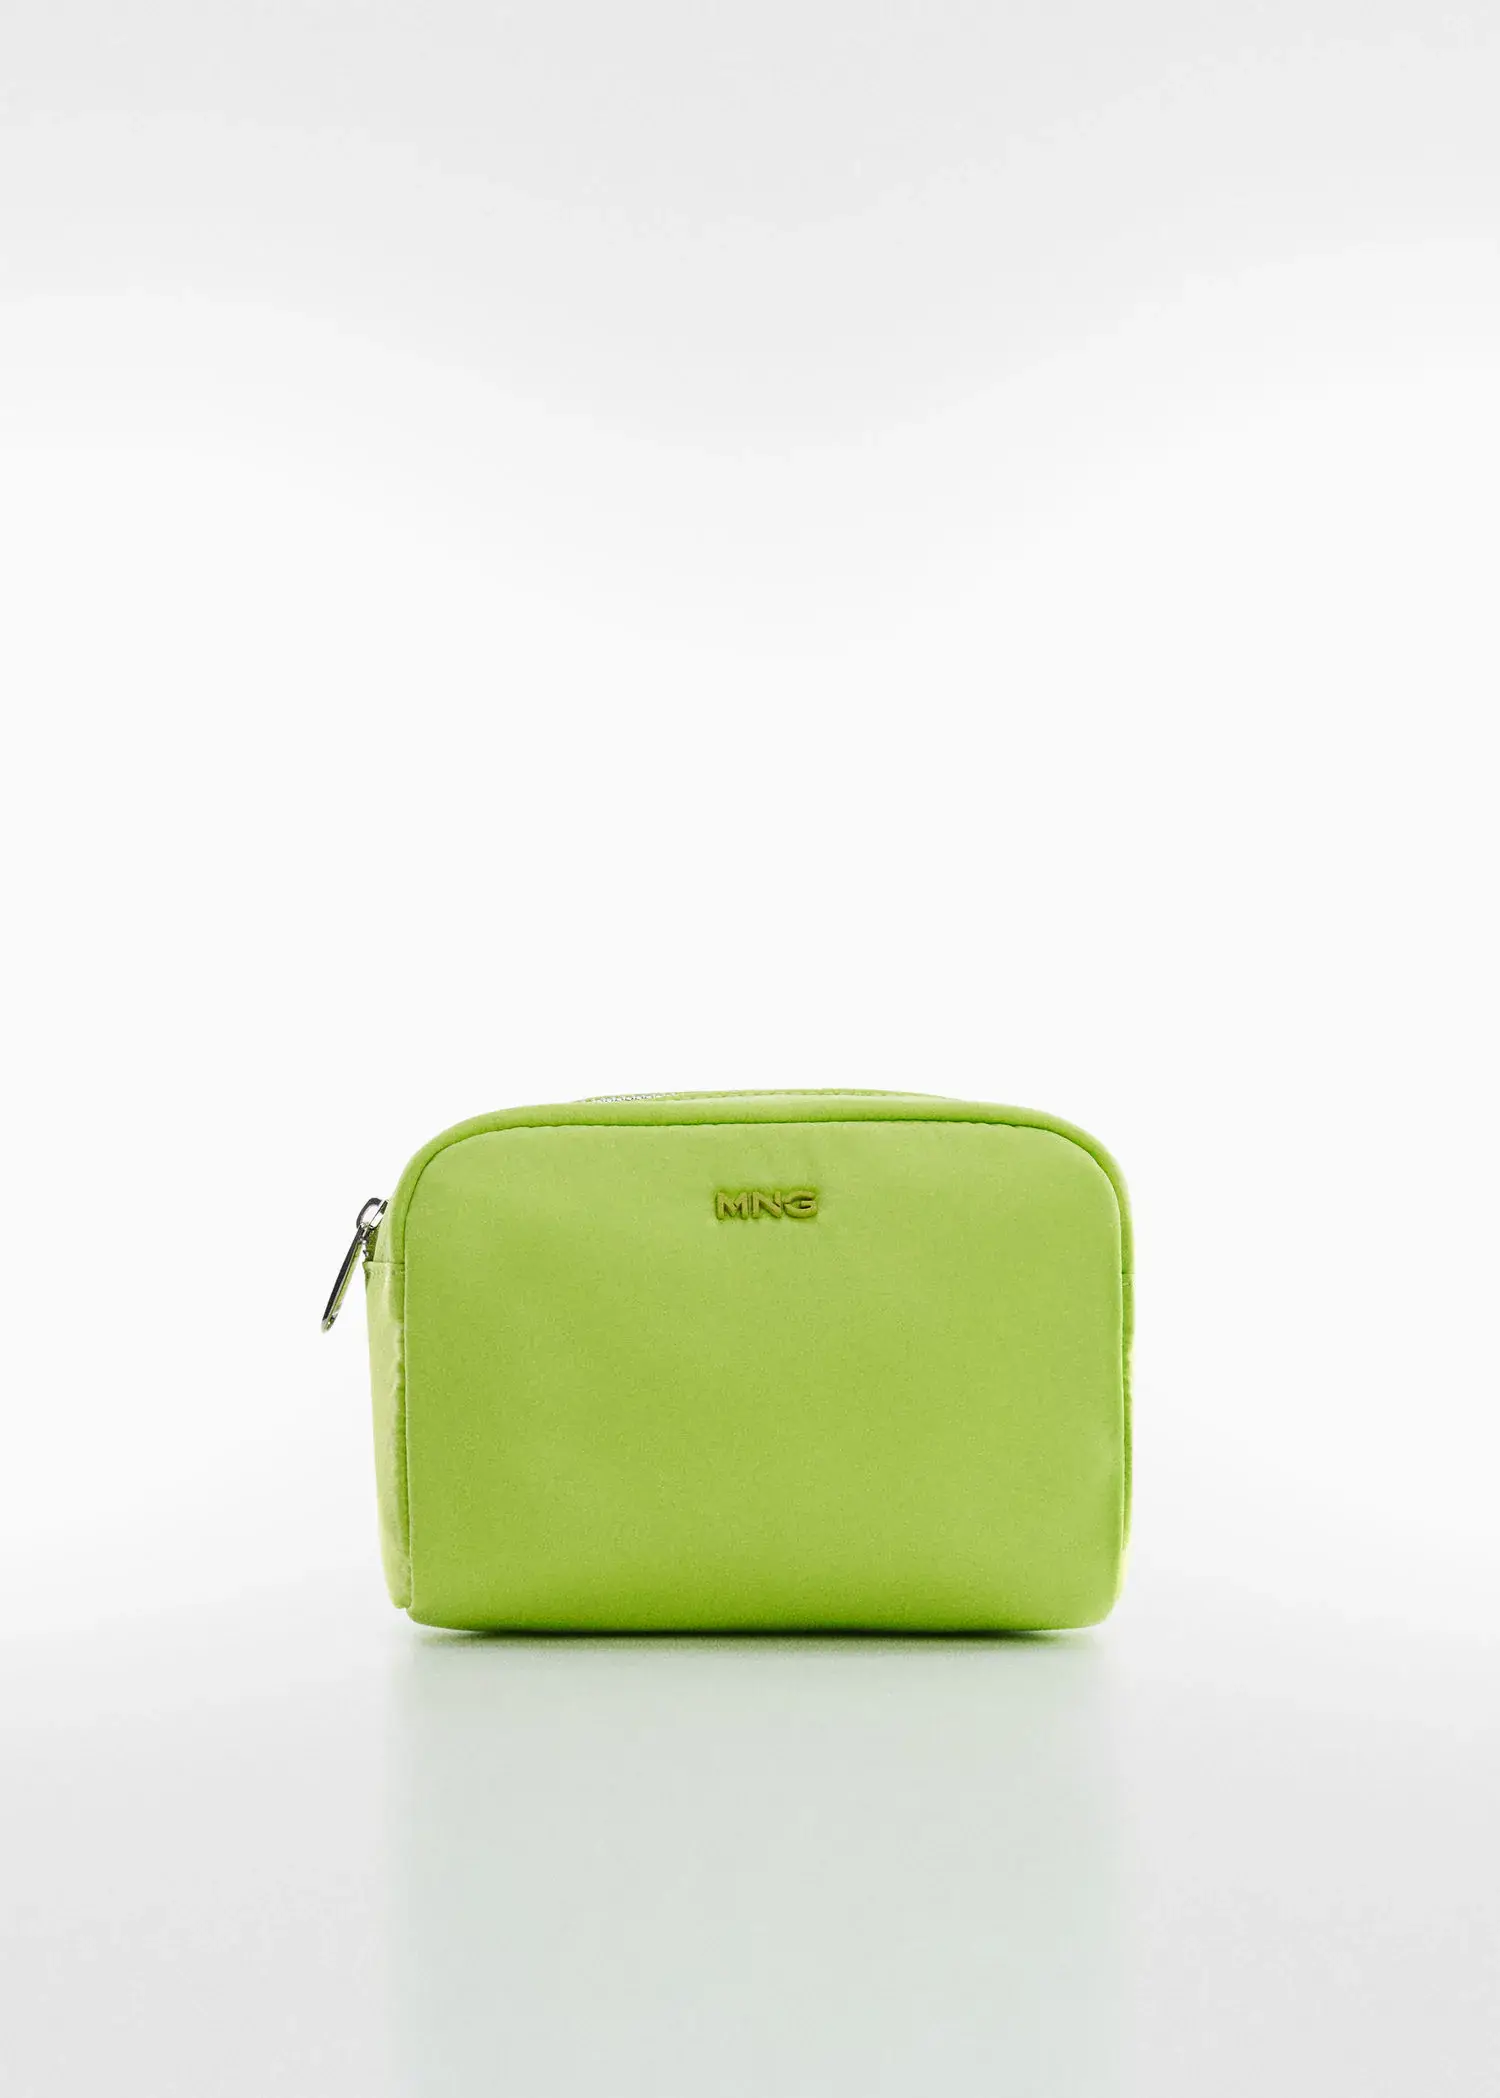 Mango Zipped toiletry bag with logo. a lime green purse sitting on top of a white table. 